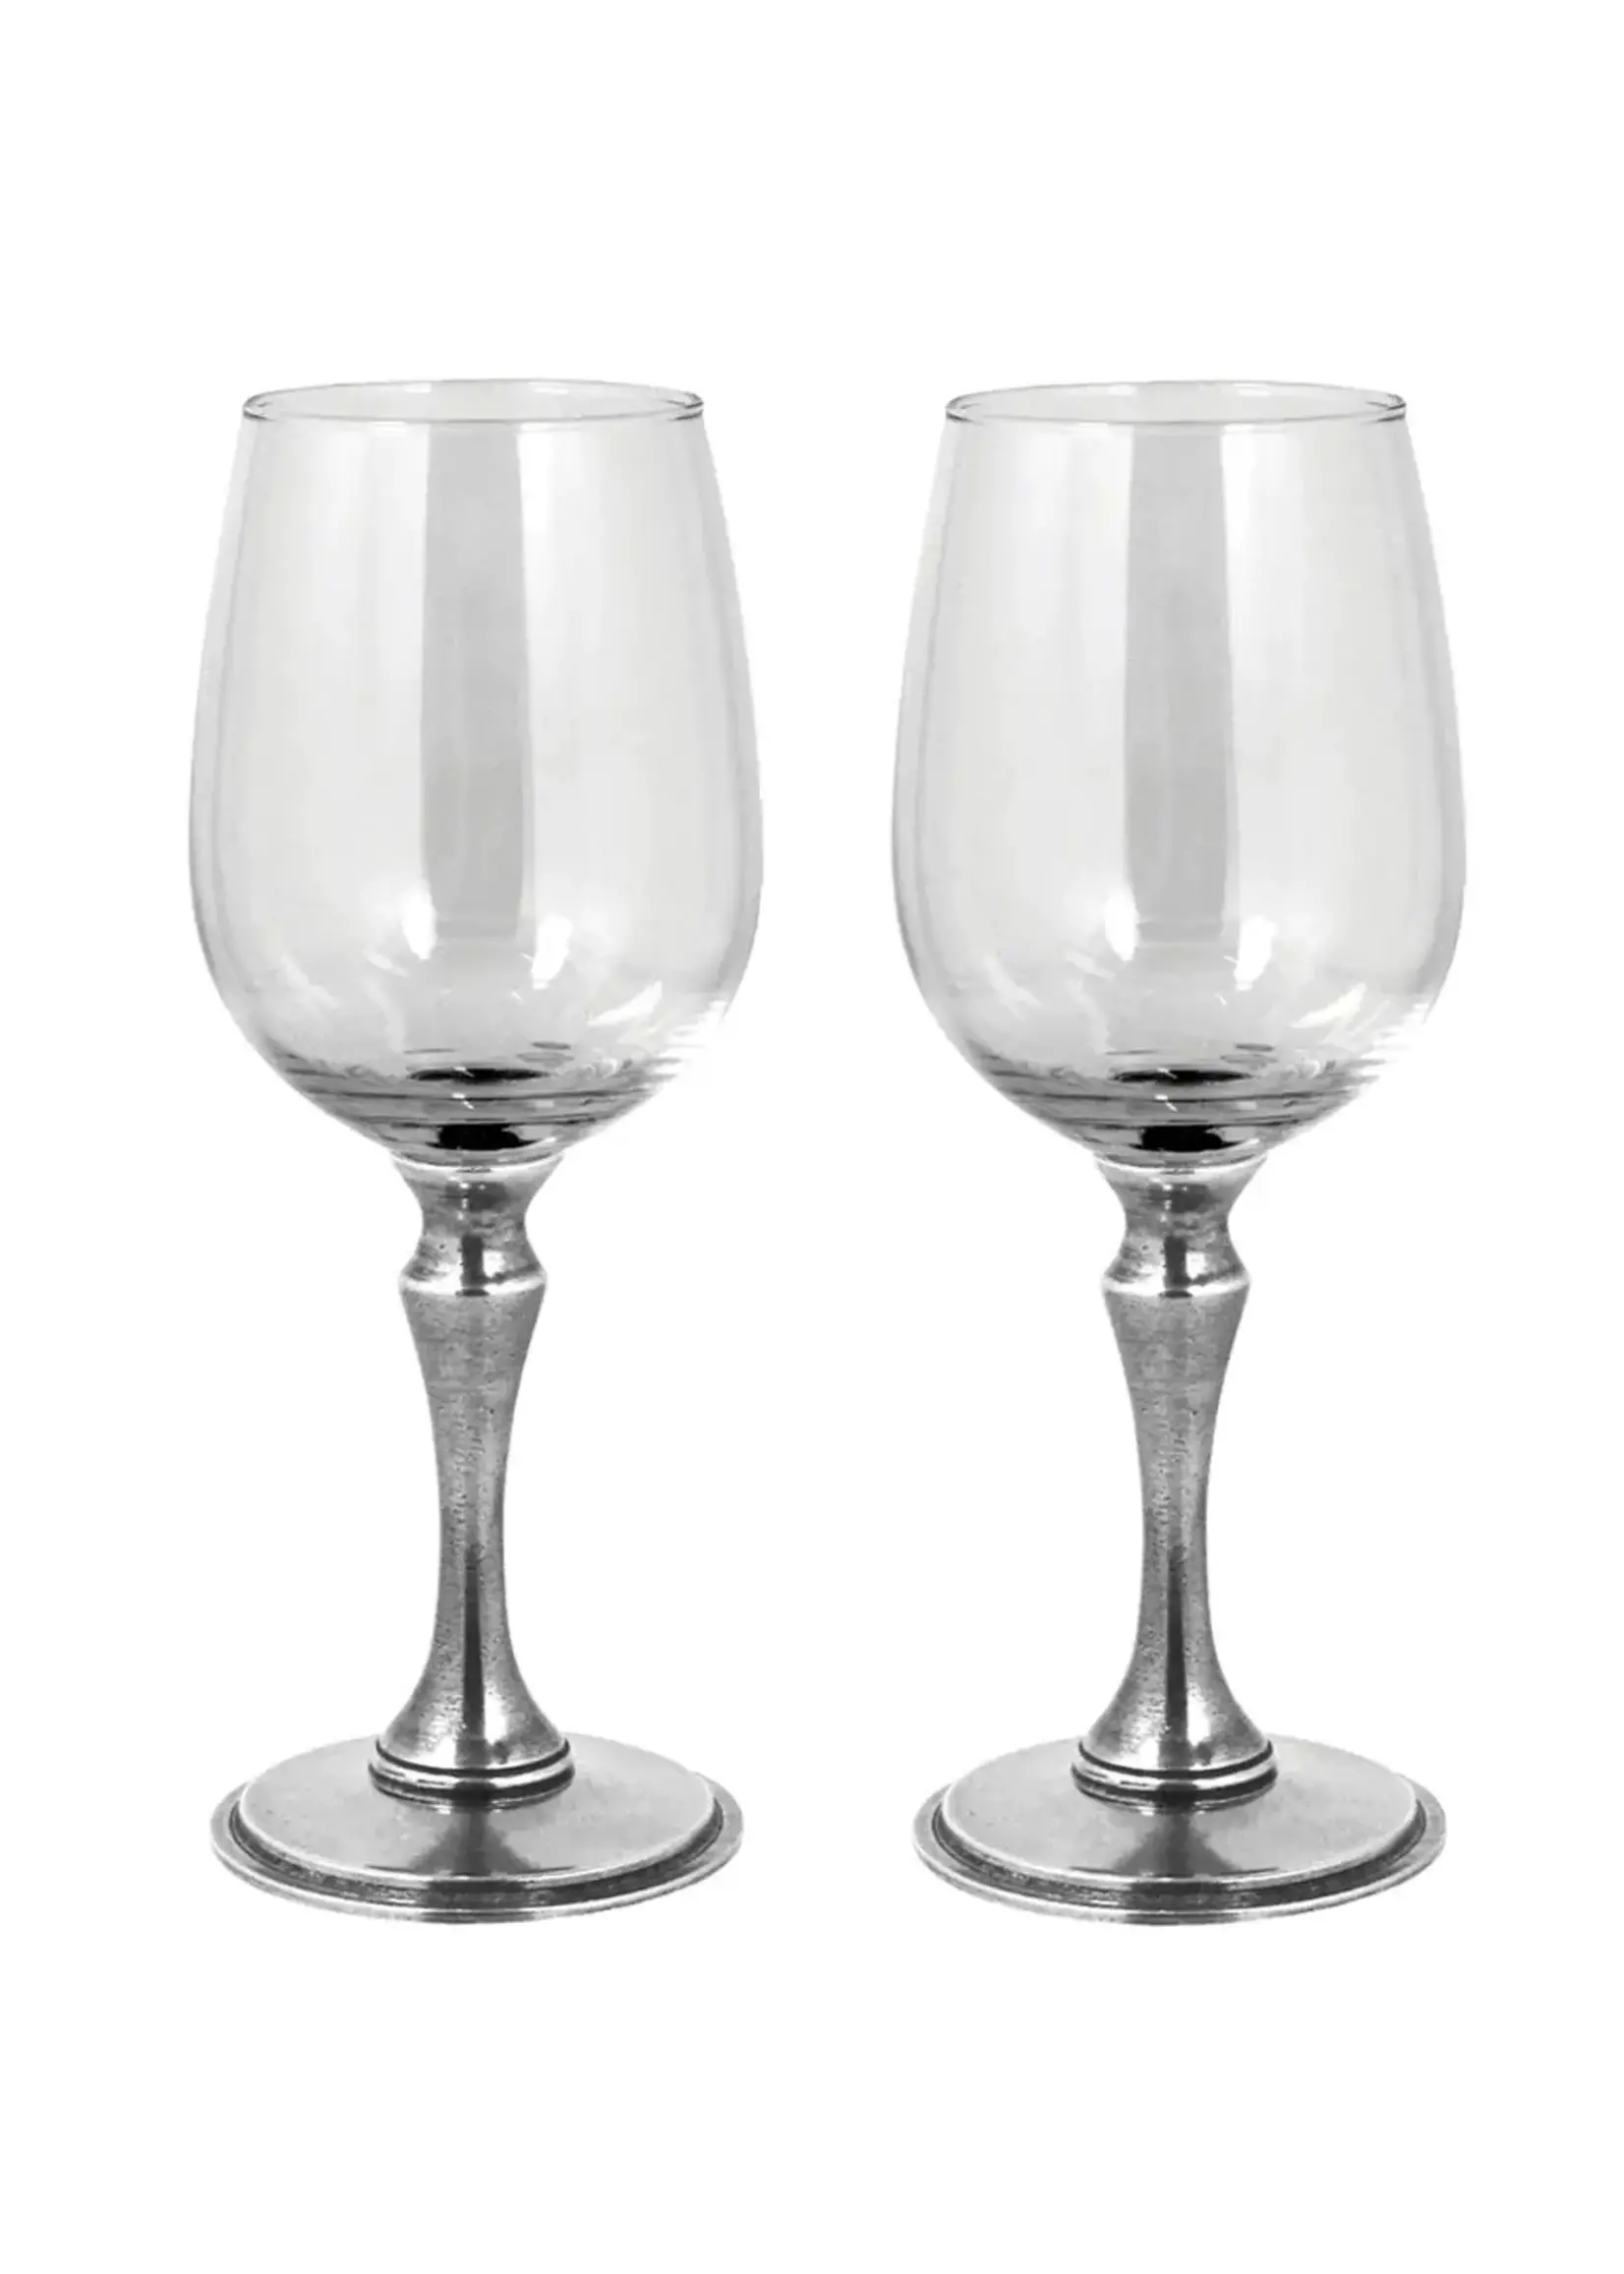 English Pewter Company Pewter Stem Wine Glass set of Two, Vogue